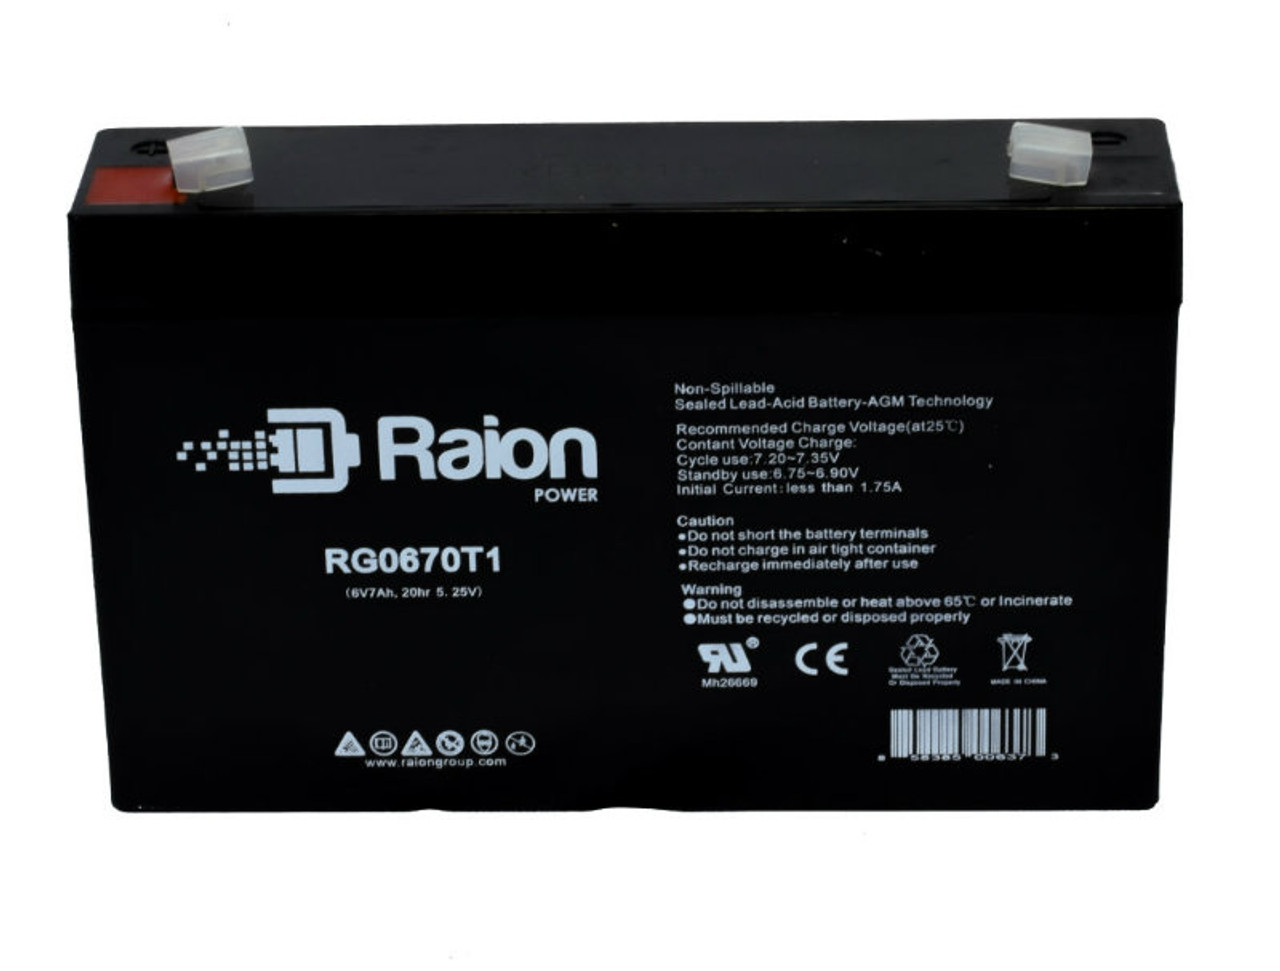 Raion Power RG0670T1 Replacement Battery Cartridge for Lionville Systems 800 Med Cart